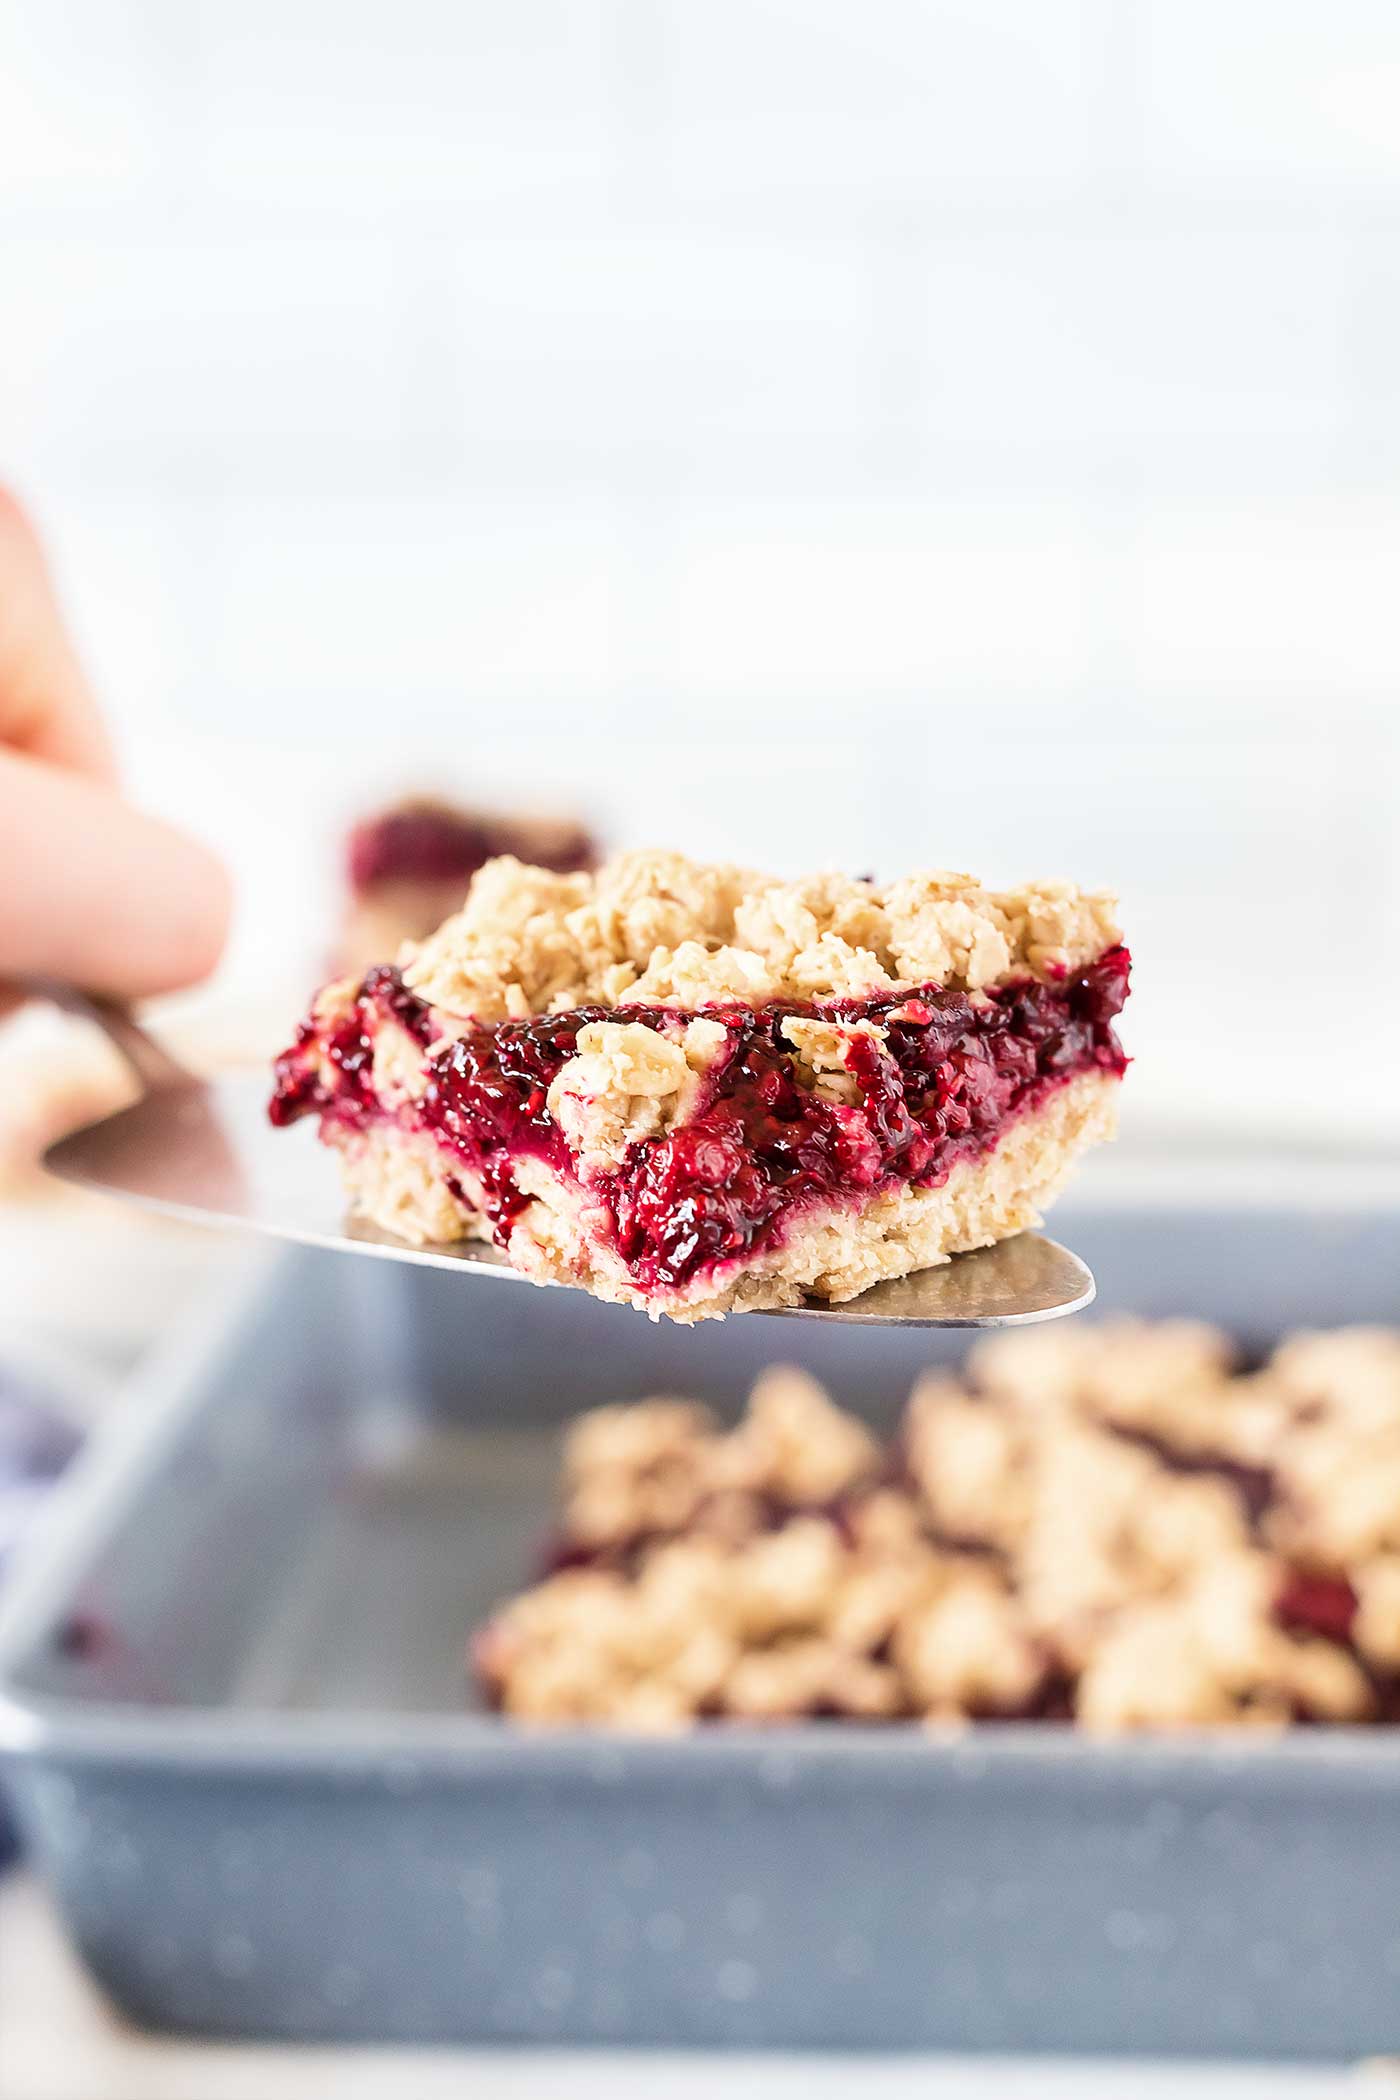 Hand serving a piece of Homemade Oatmeal Bars with Blackberries